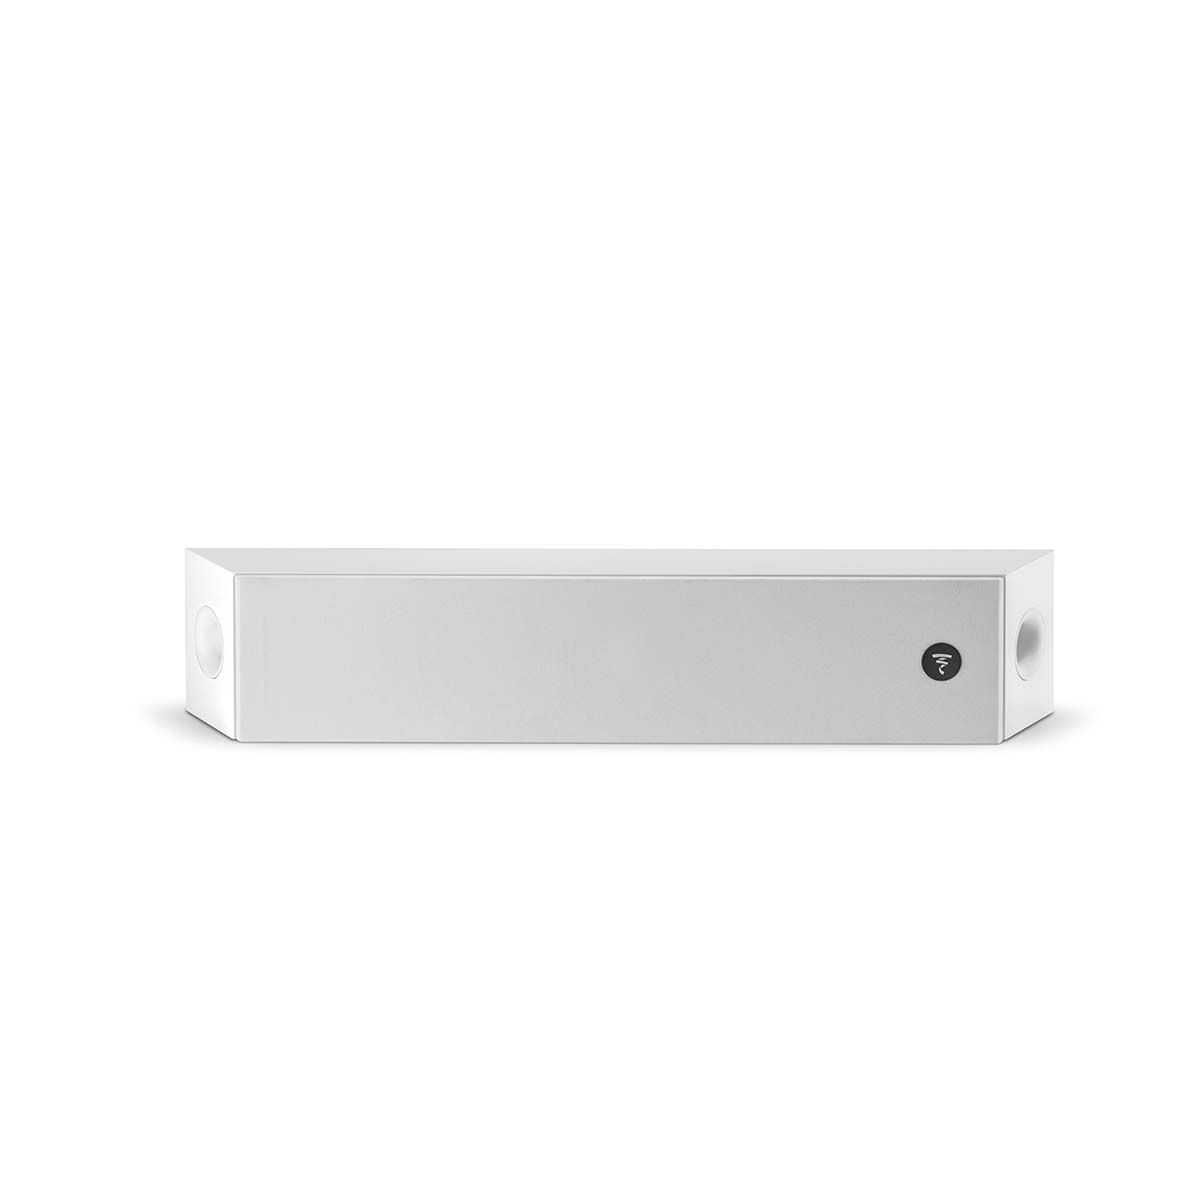 Focal On Wall 301 Speaker, Gloss White, horizontal front view with grille